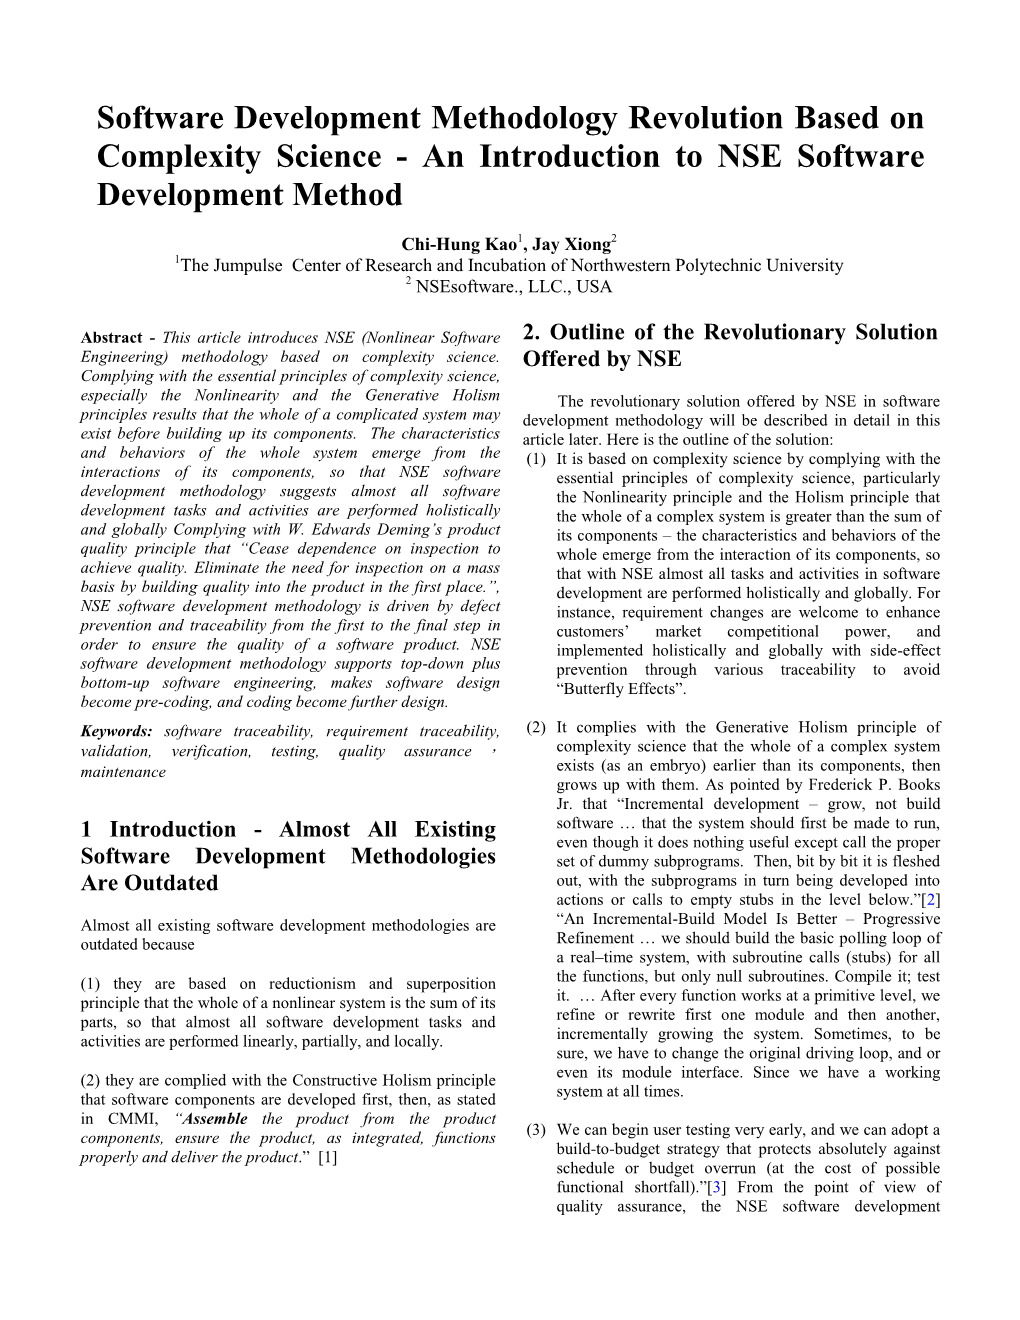 Software Development Methodology Revolution Based on Complexity Science - an Introduction to NSE Software Development Method